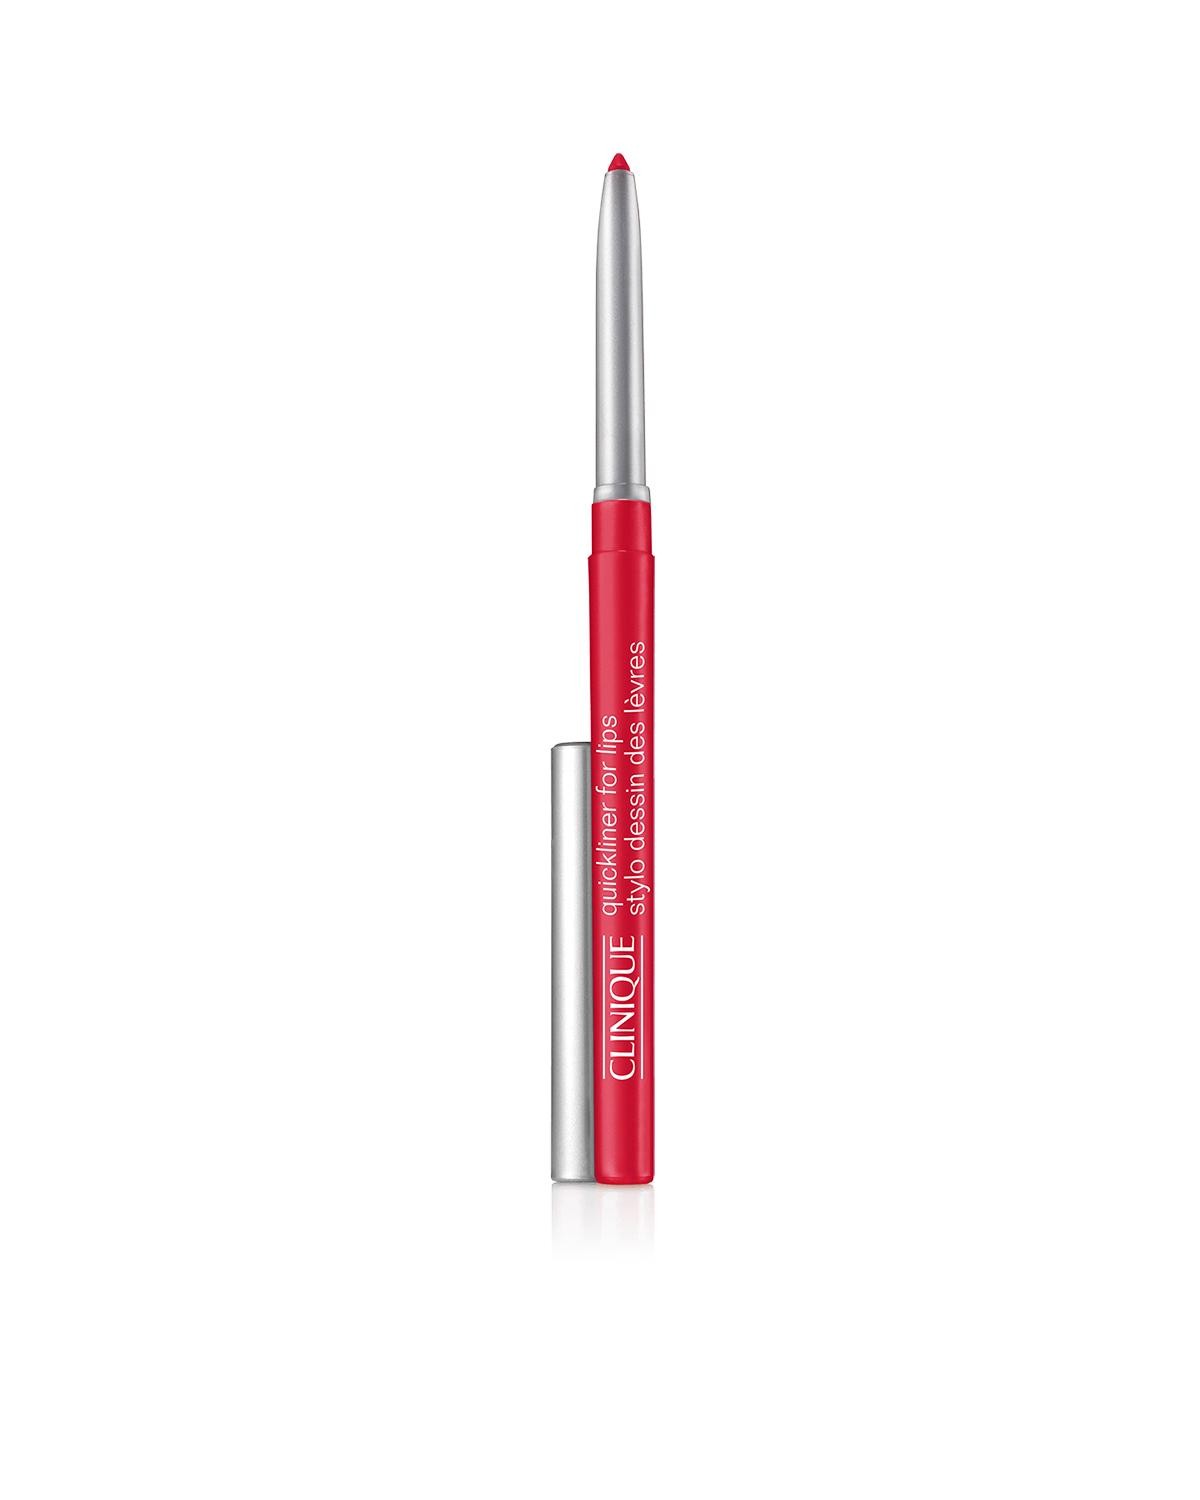 Clinique Quickliner For Lips, 47 French Poppy, 0.3 g